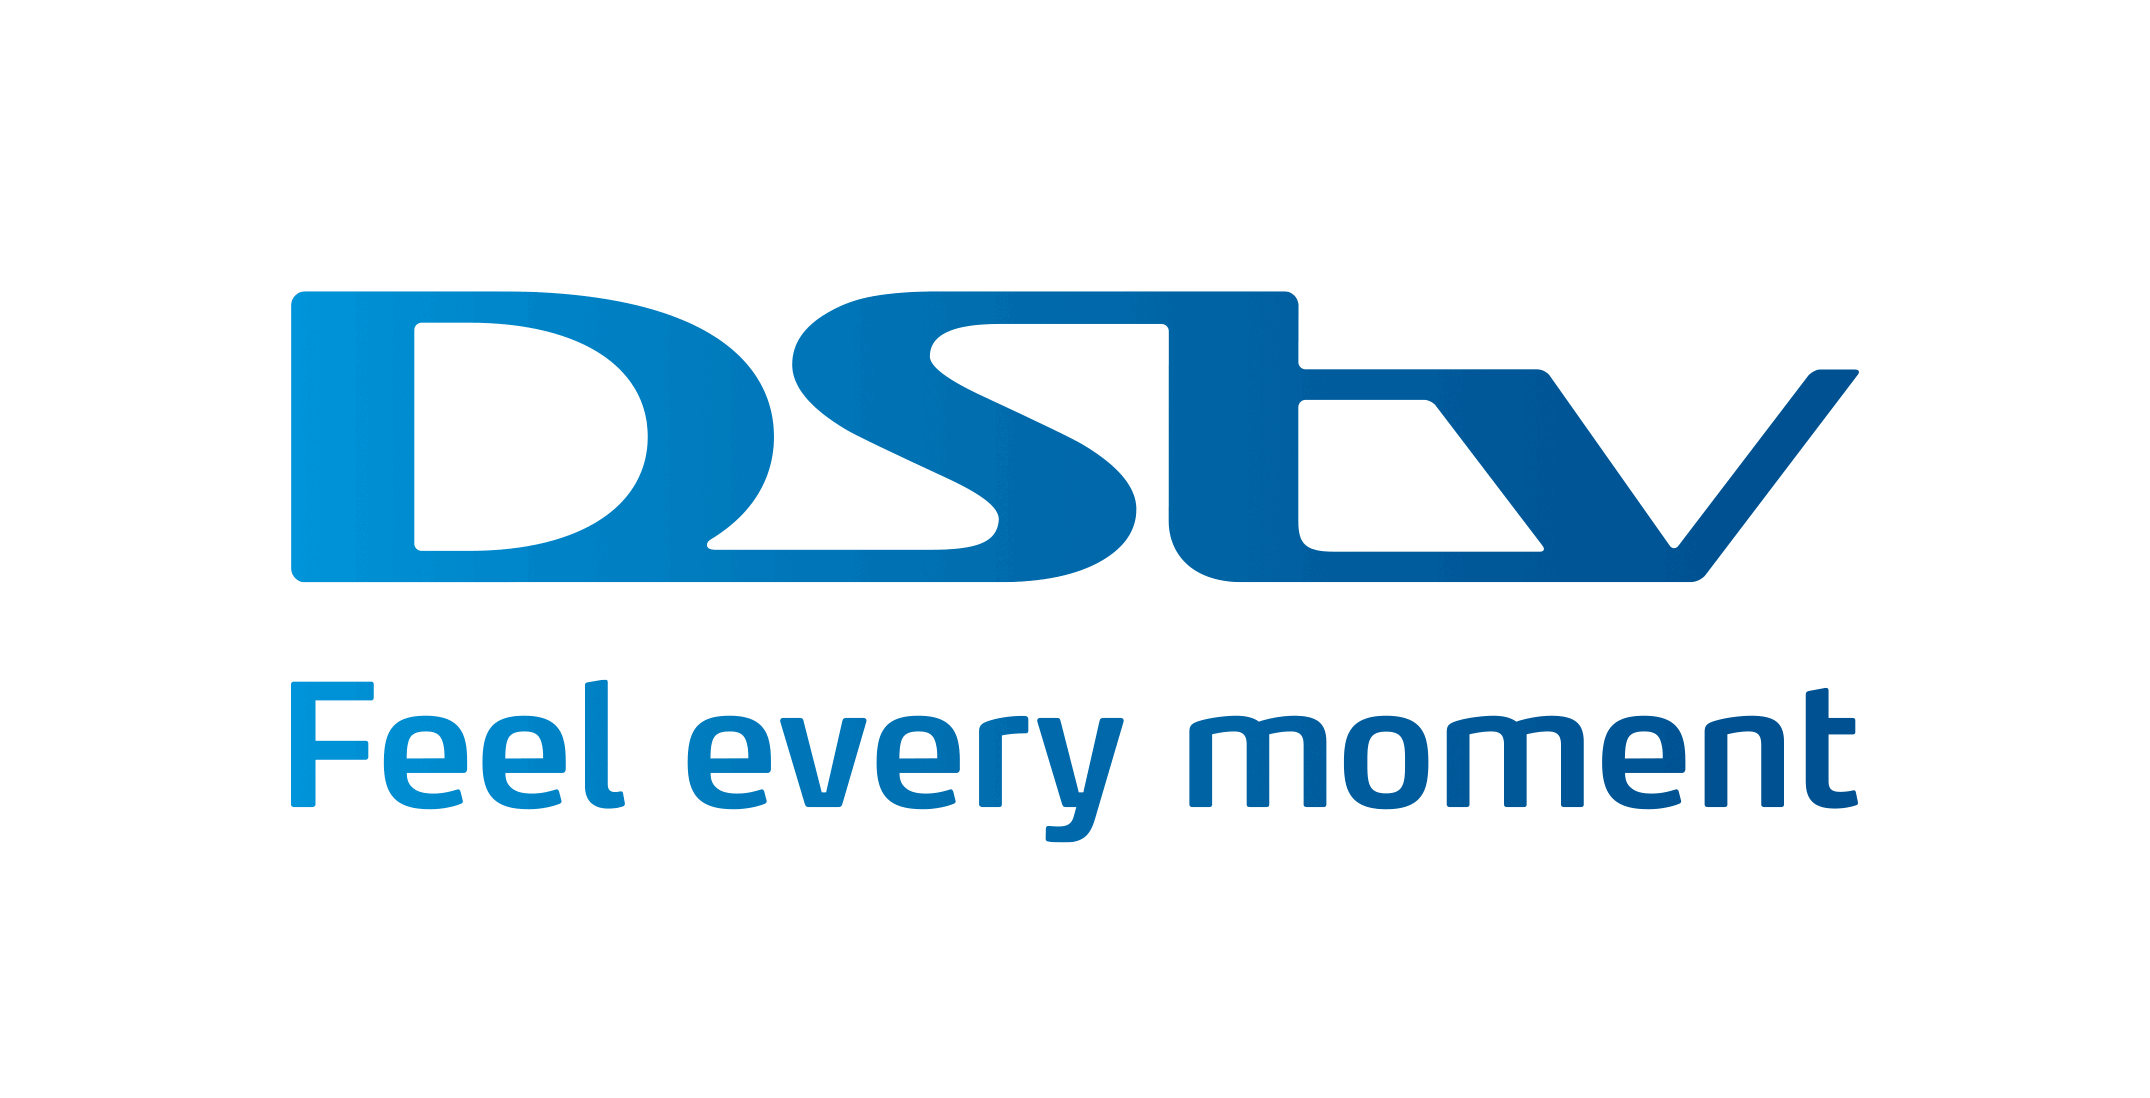 DStv Earns Top Spot as Africa's Most-Admired Media Brand in the 13th Brand Africa 100: Africa’s Best Brands Survey